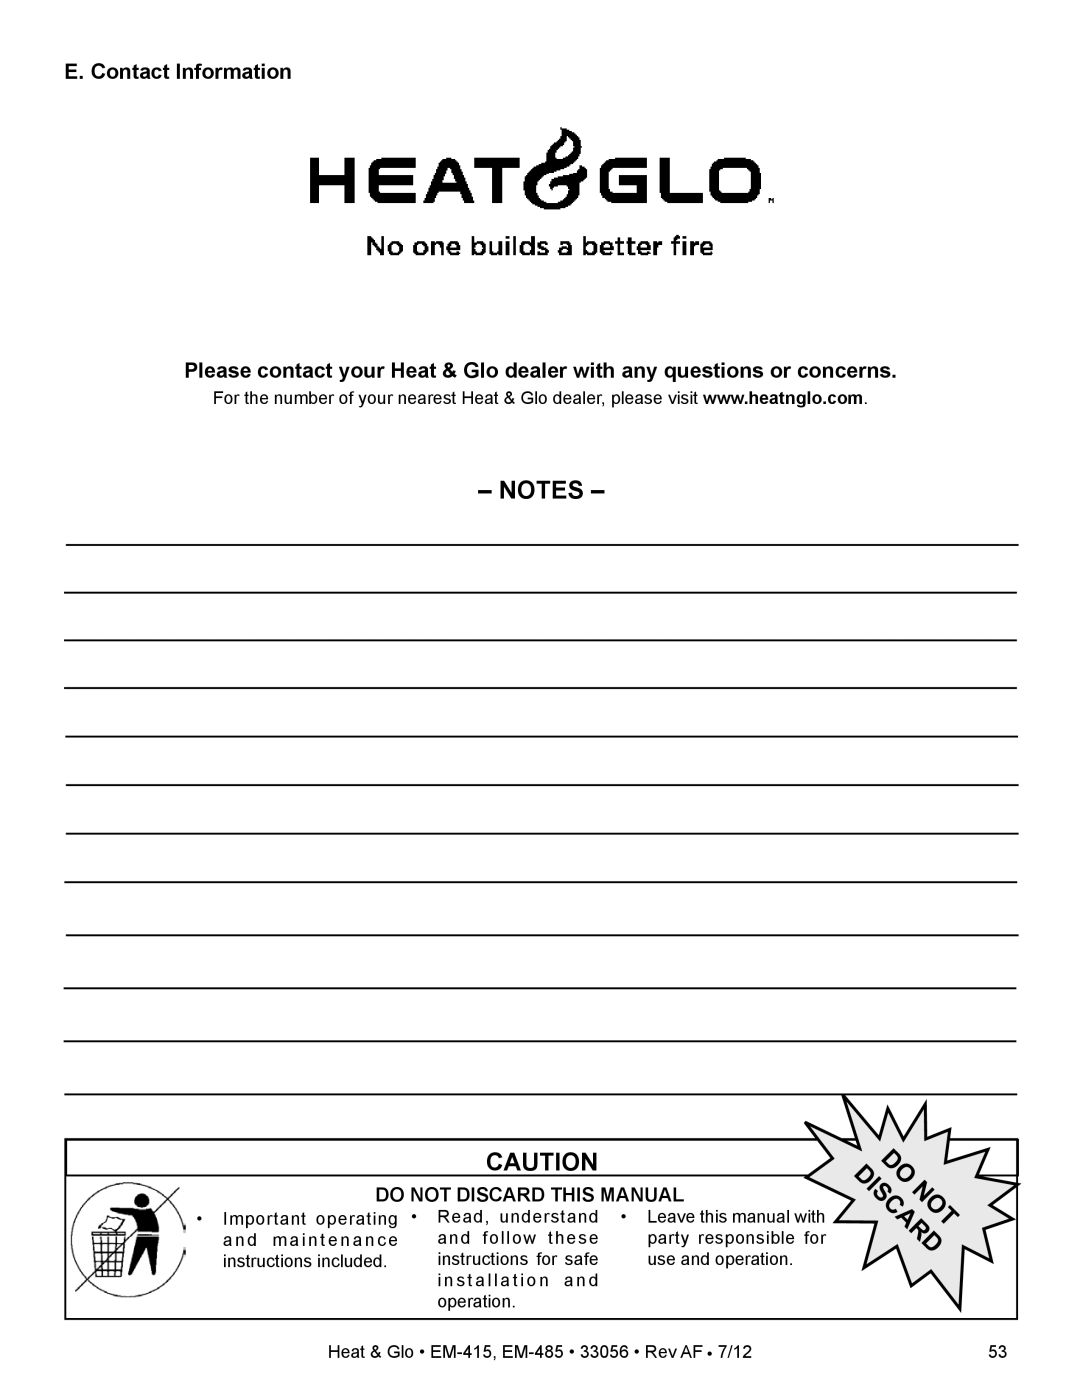 Heat & Glo LifeStyle EM-485T - 42, EM-415 - 36 Notes, E. Contact Information, Do Not Discard This Manual, Do Discardnot 